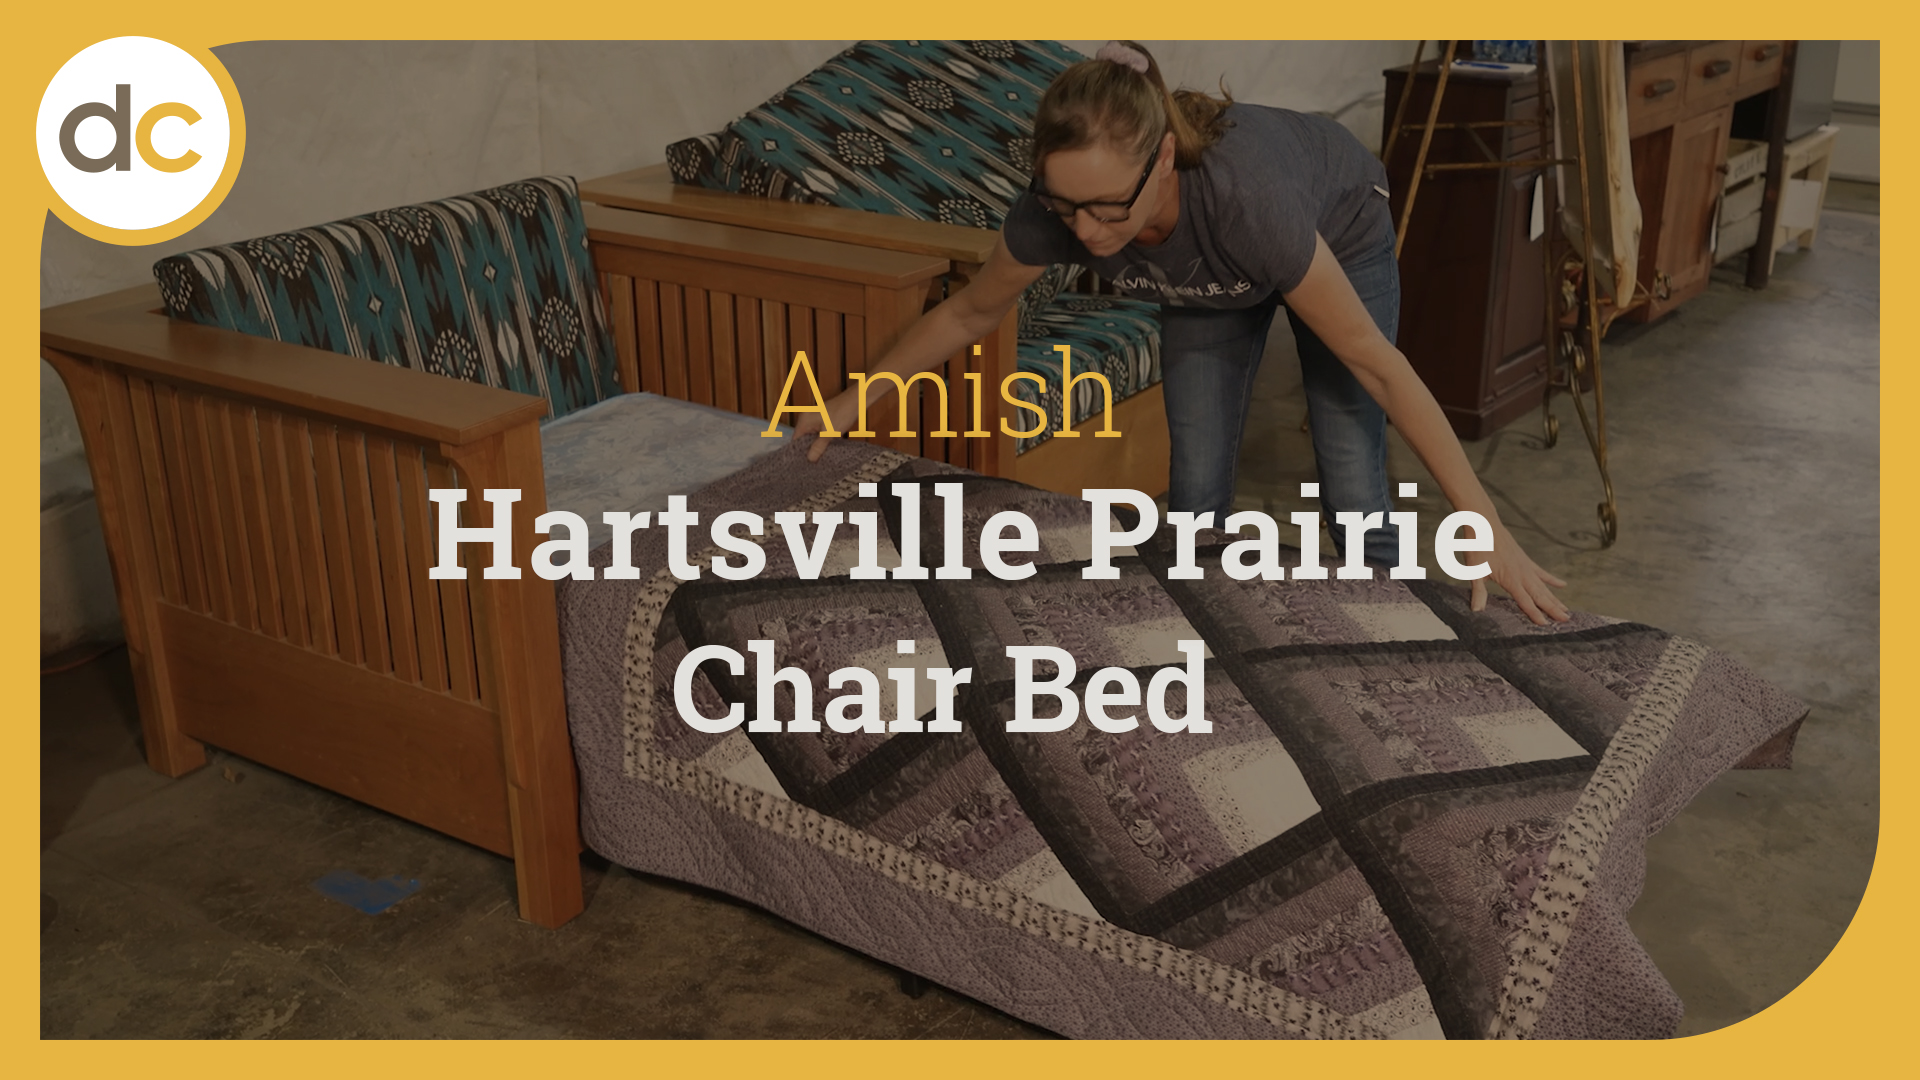 Video title image that says, "Amish Hartsville Prairie Chair Bed"